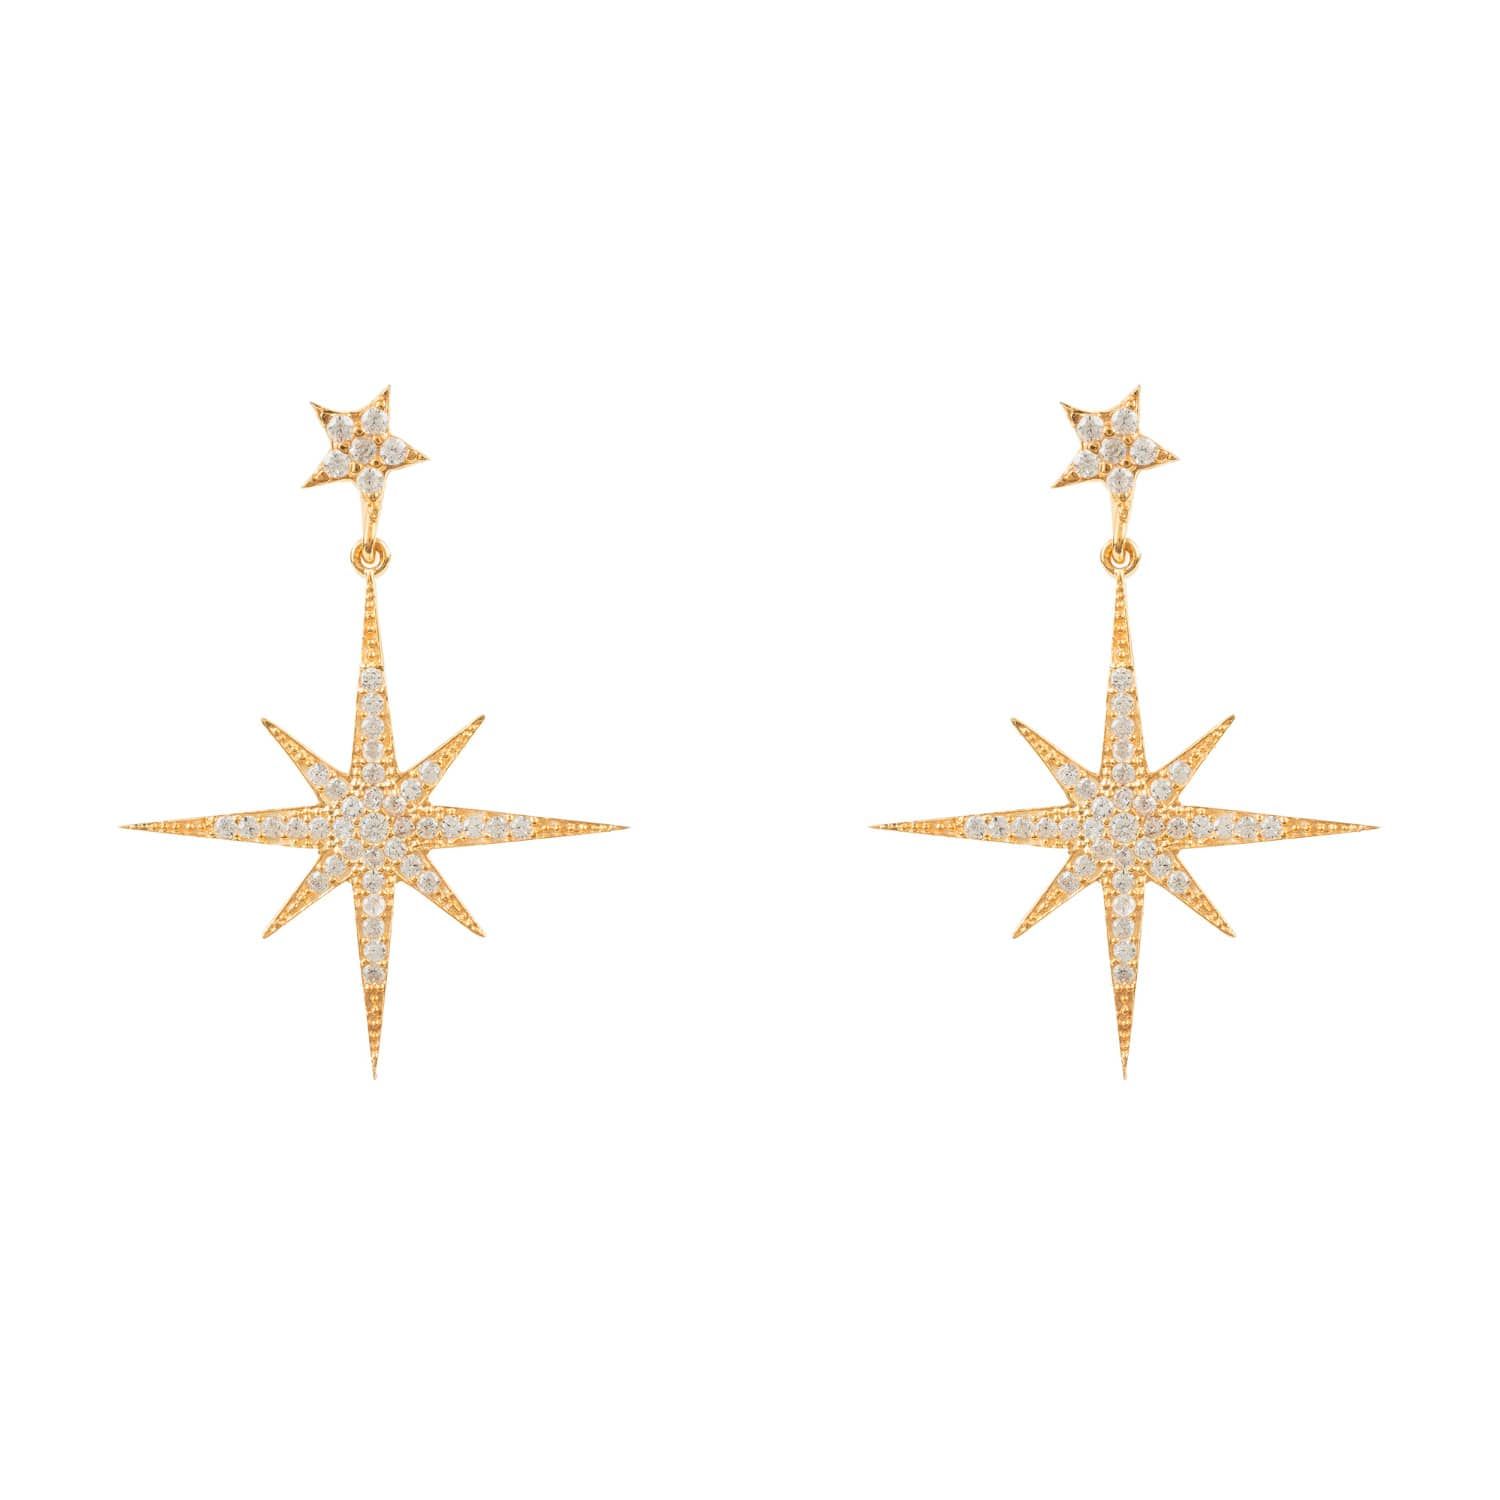 Petite Star Burst Drop Earring Gold by LATELITA | Wolf and Badger (Global excl. US)